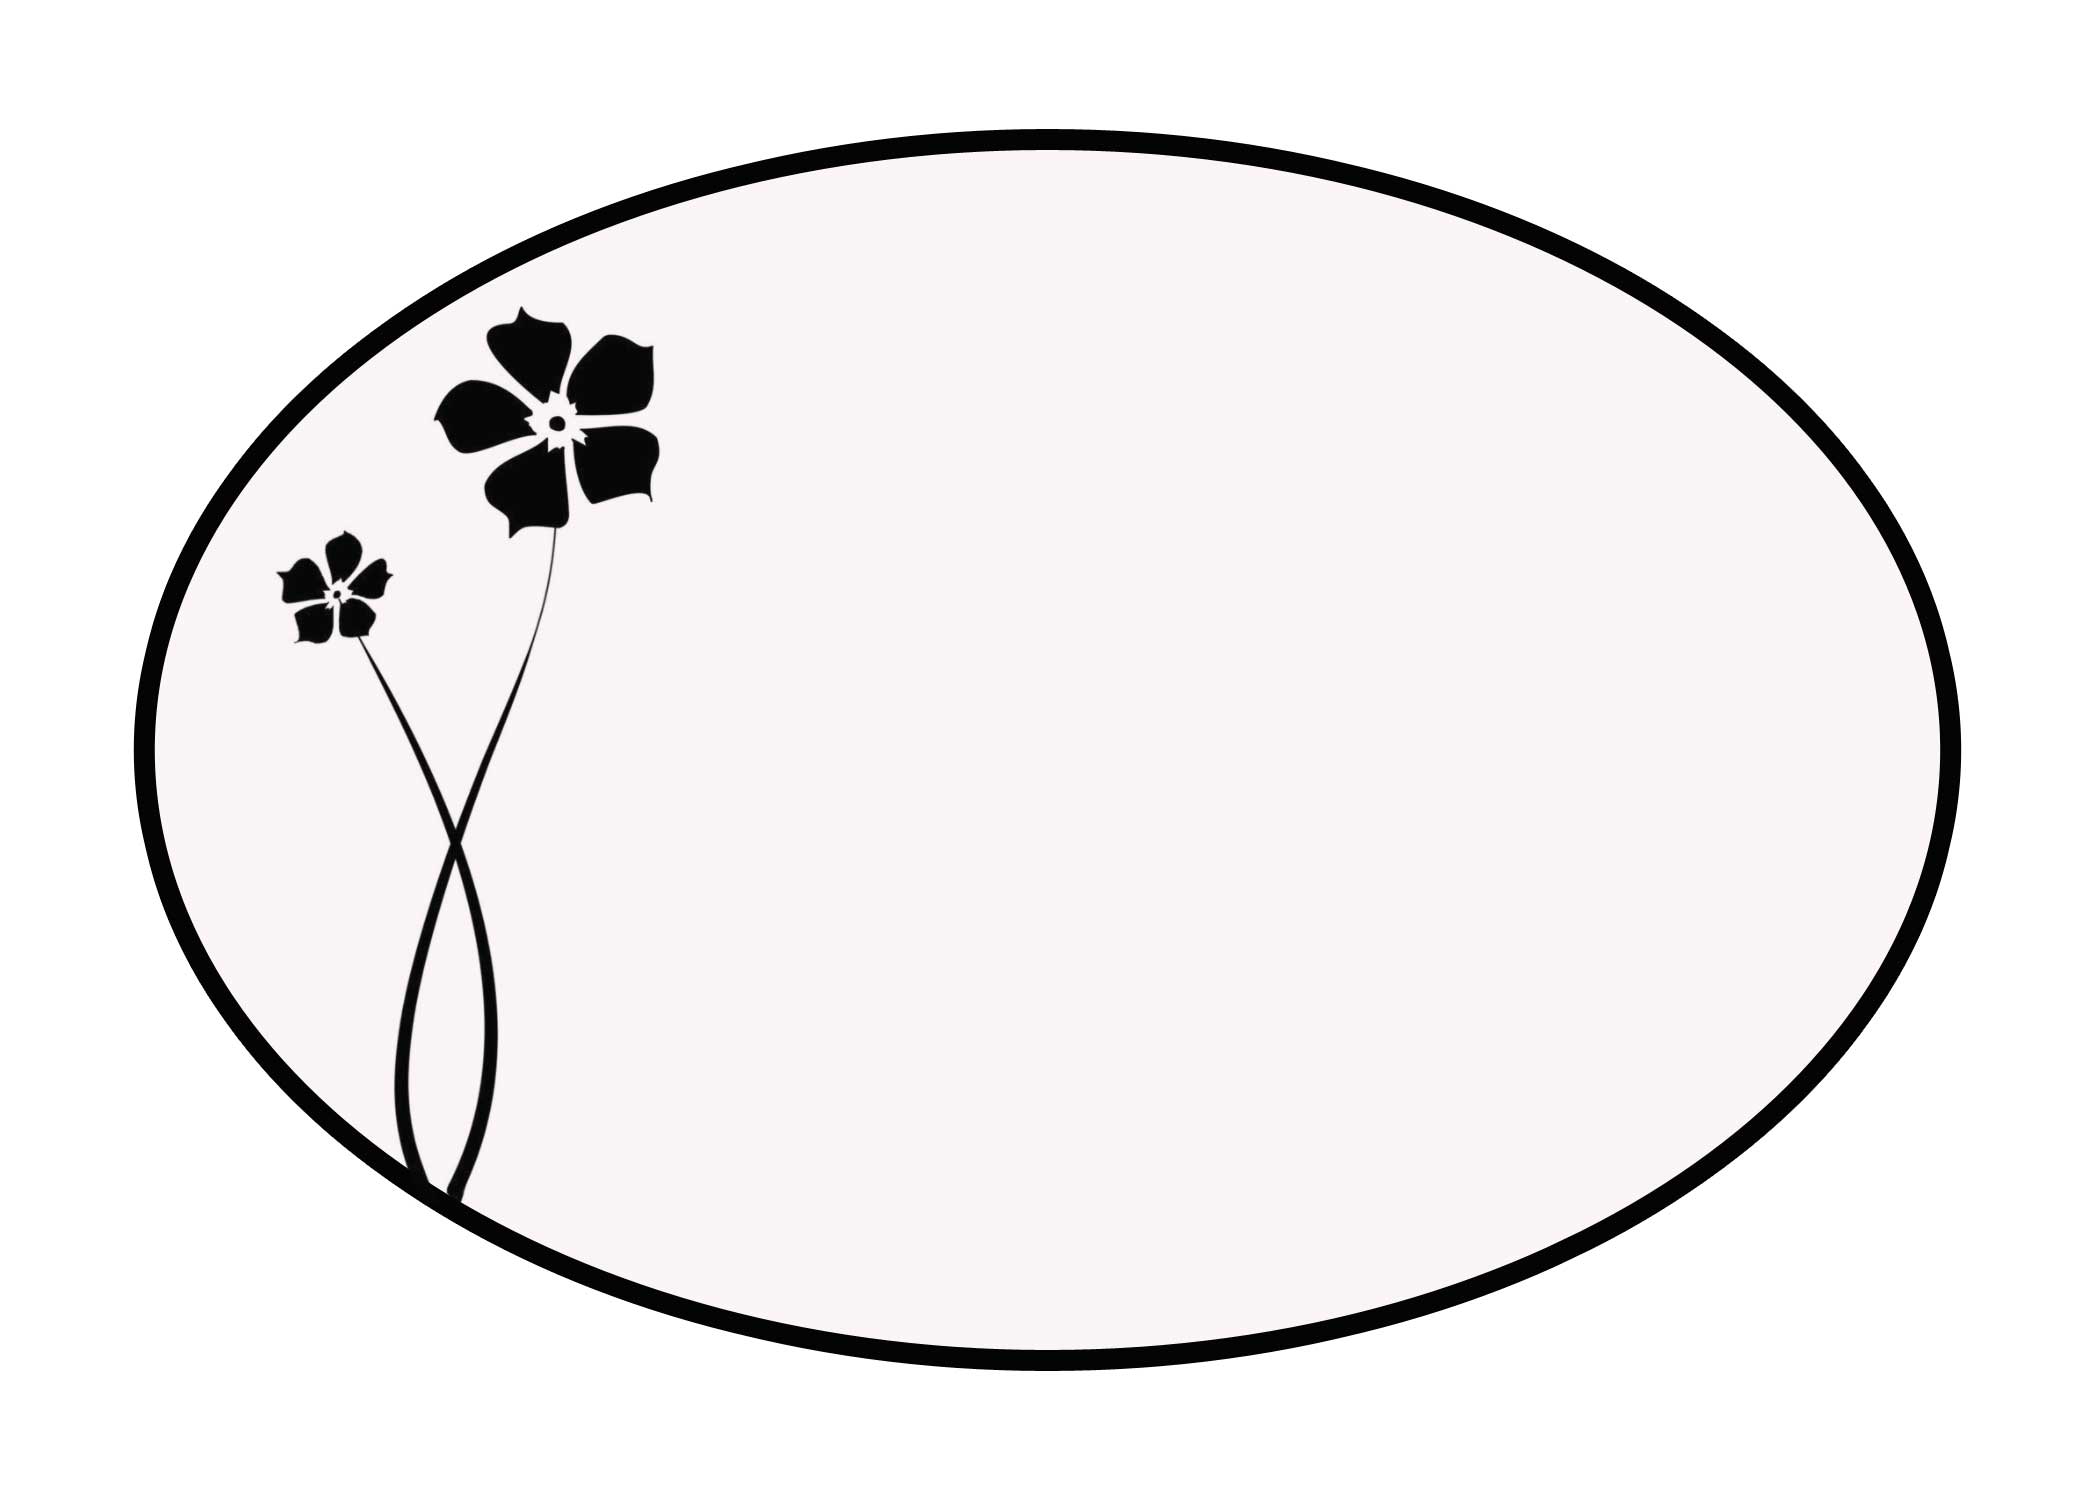 Oval Template Clipart   Clipart Best